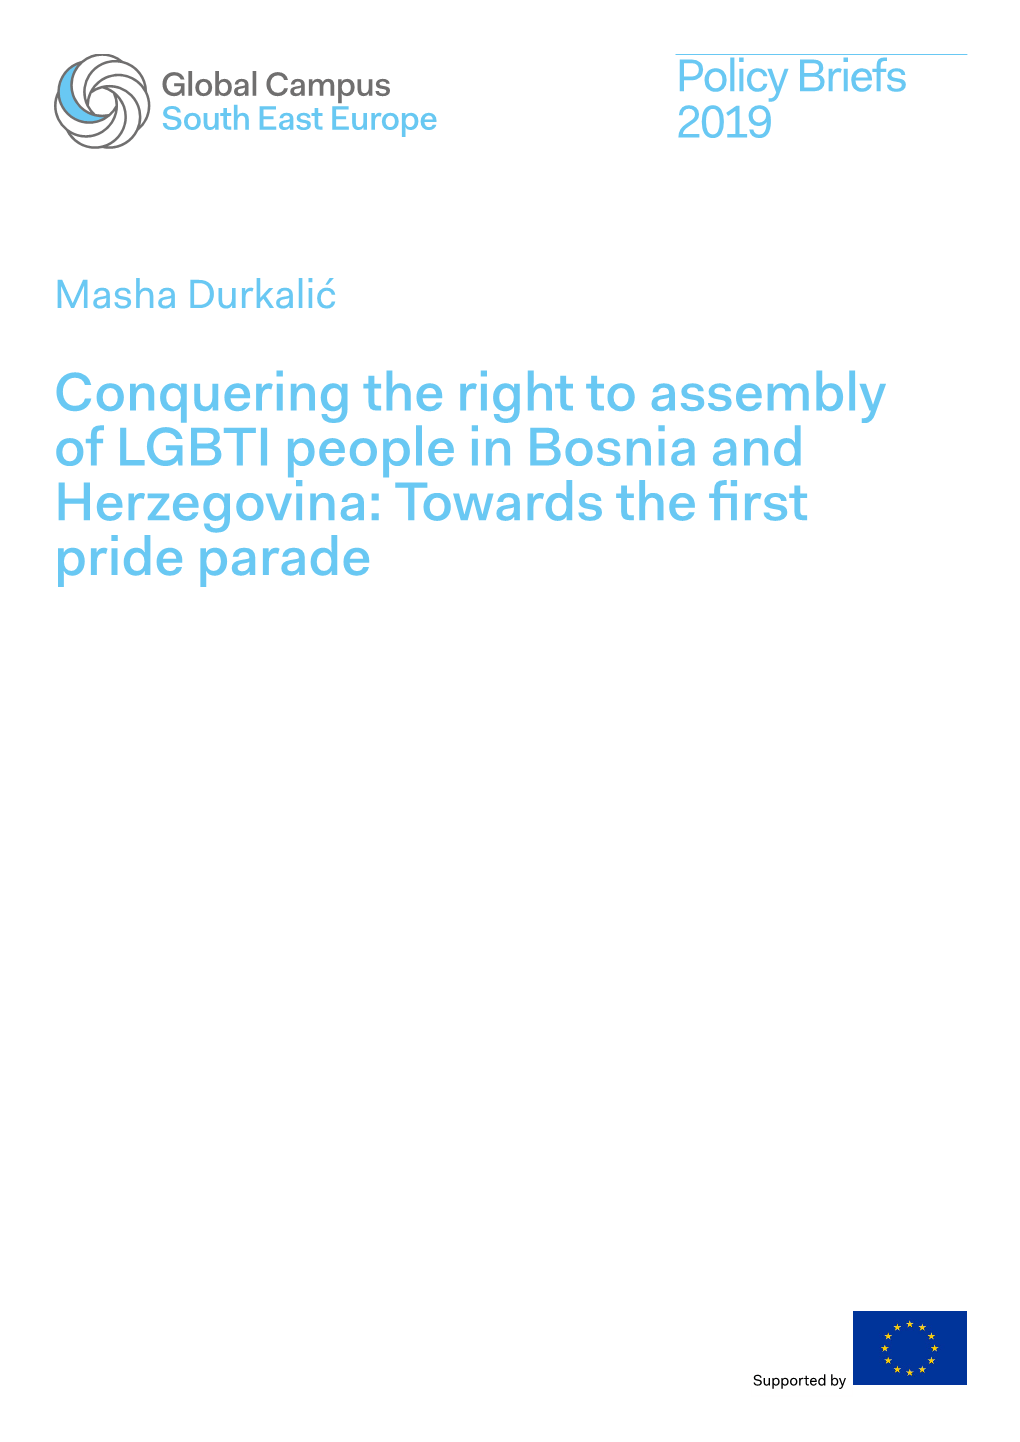 Conquering the Right to Assembly of LGBTI People in Bosnia and Herzegovina: Towards the First Pride Parade